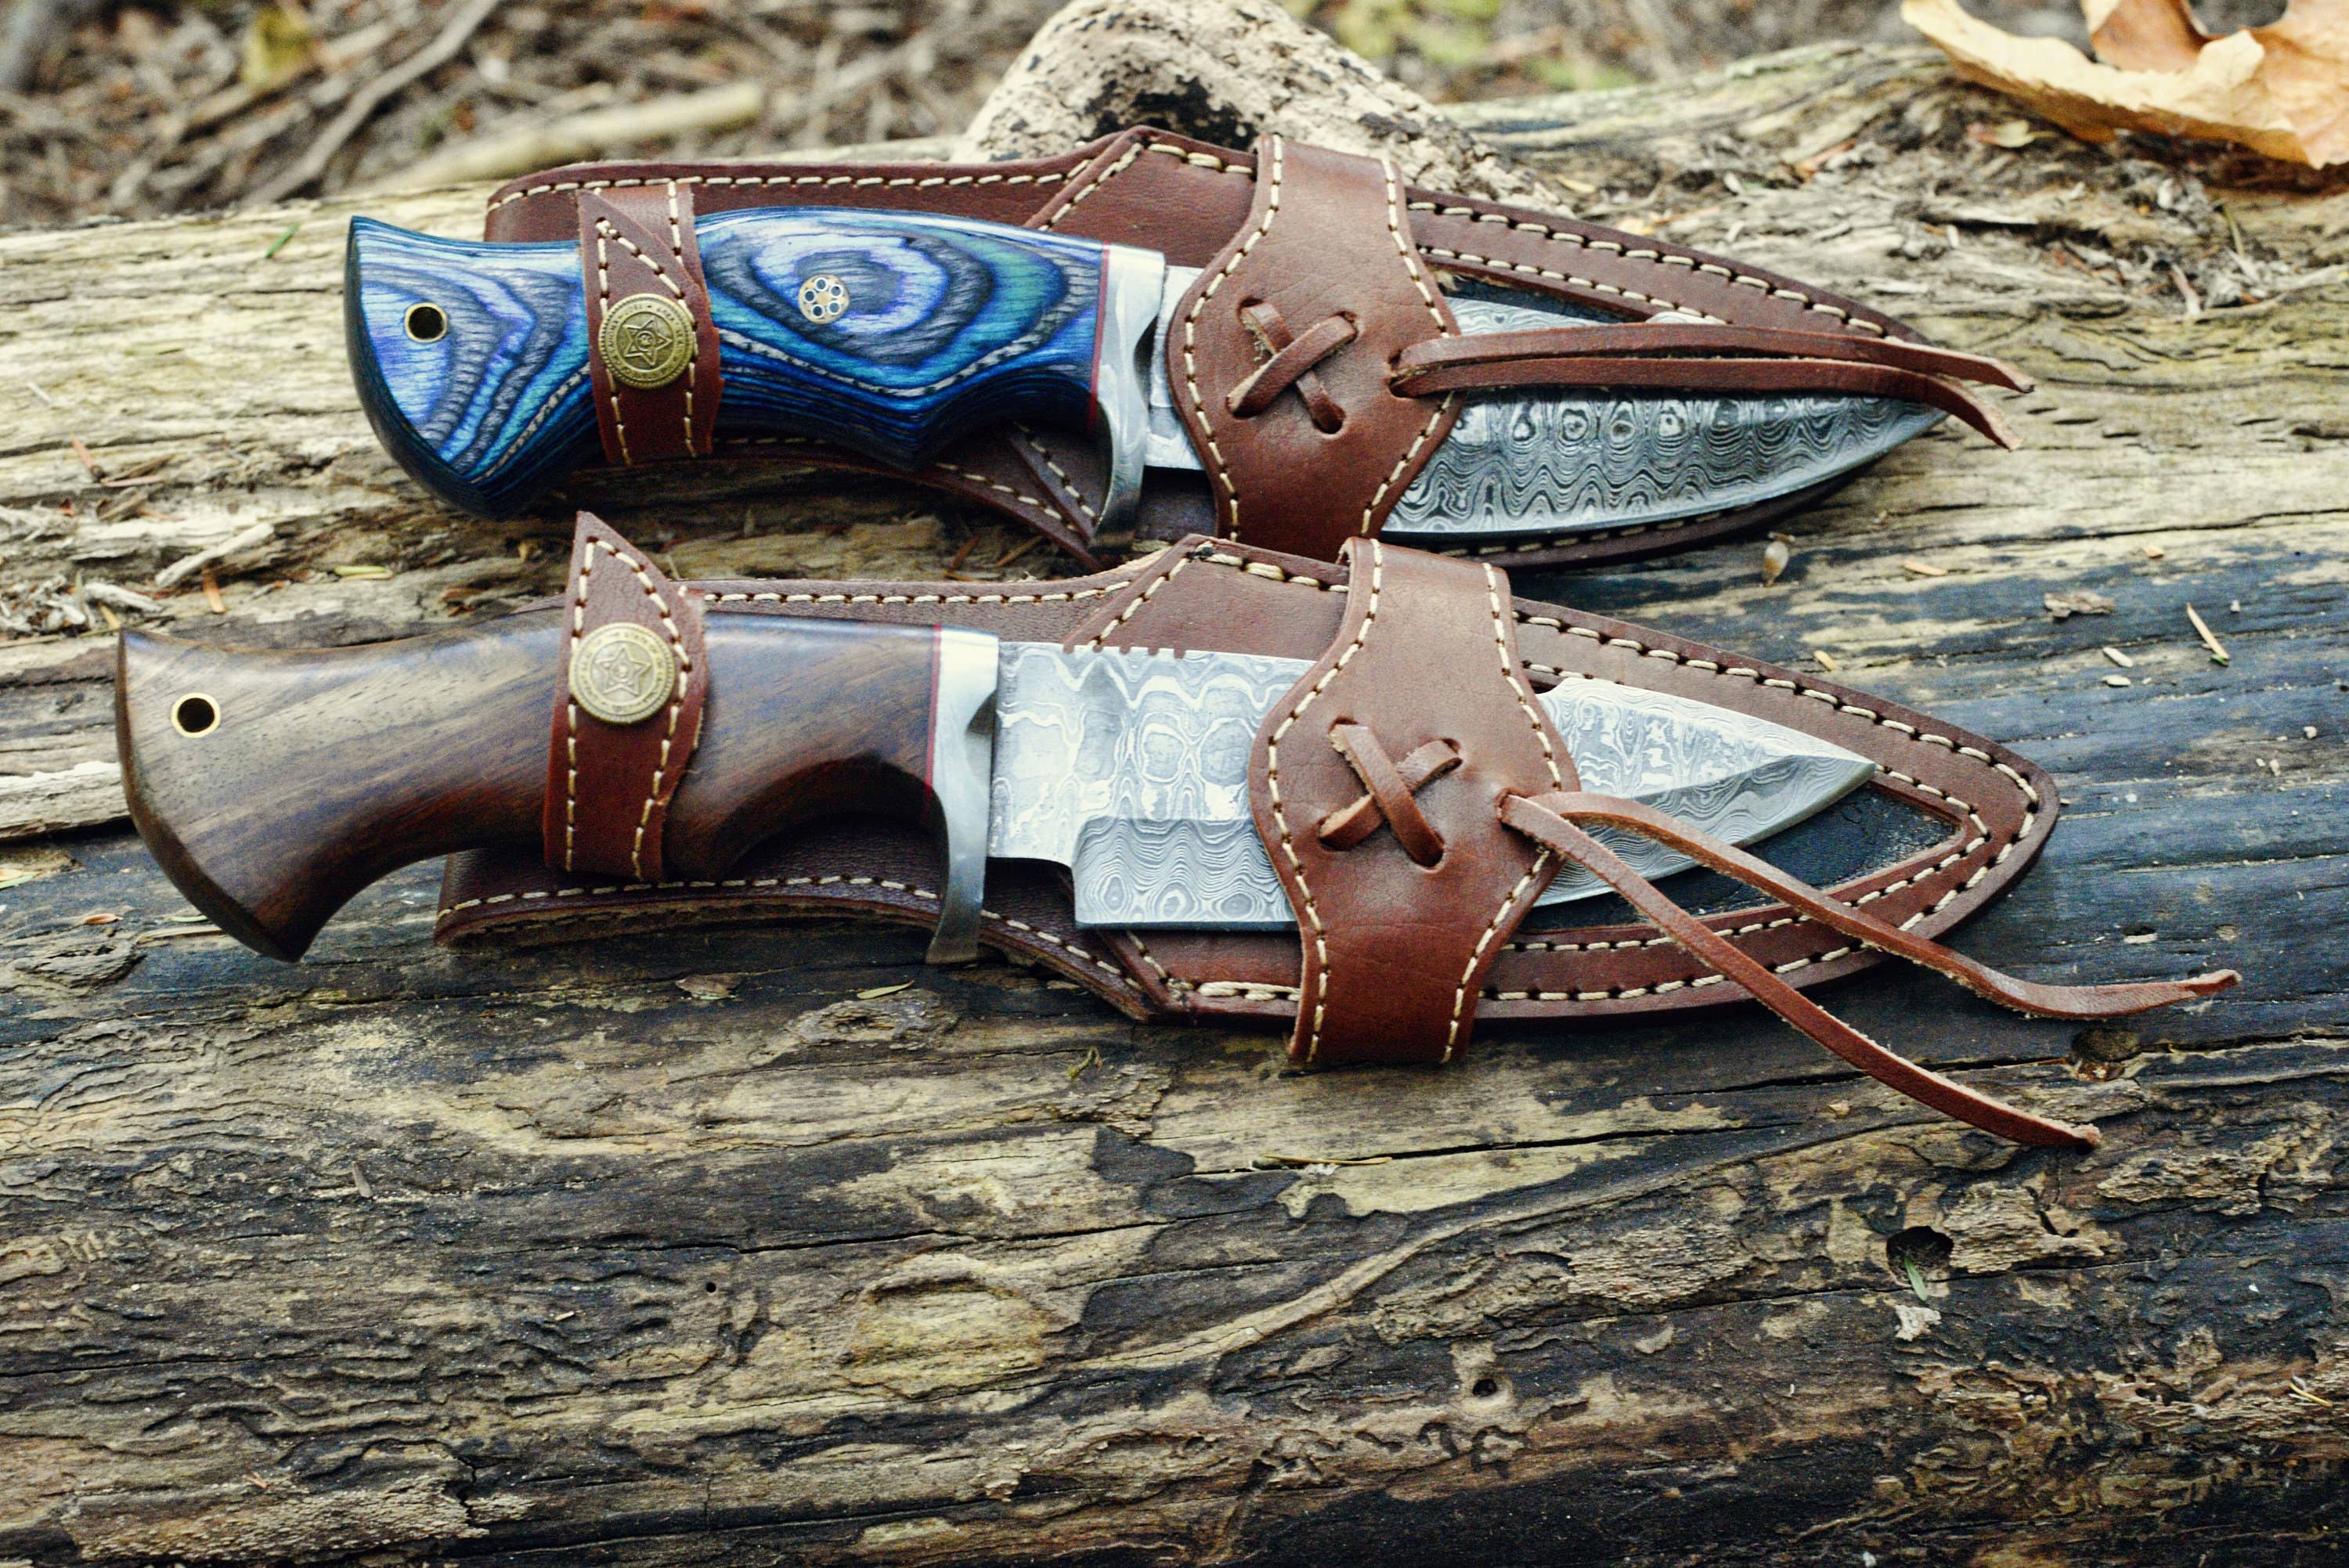 Knife - Damascus Premium Quality Hunting And Camping: Bluewood Handle